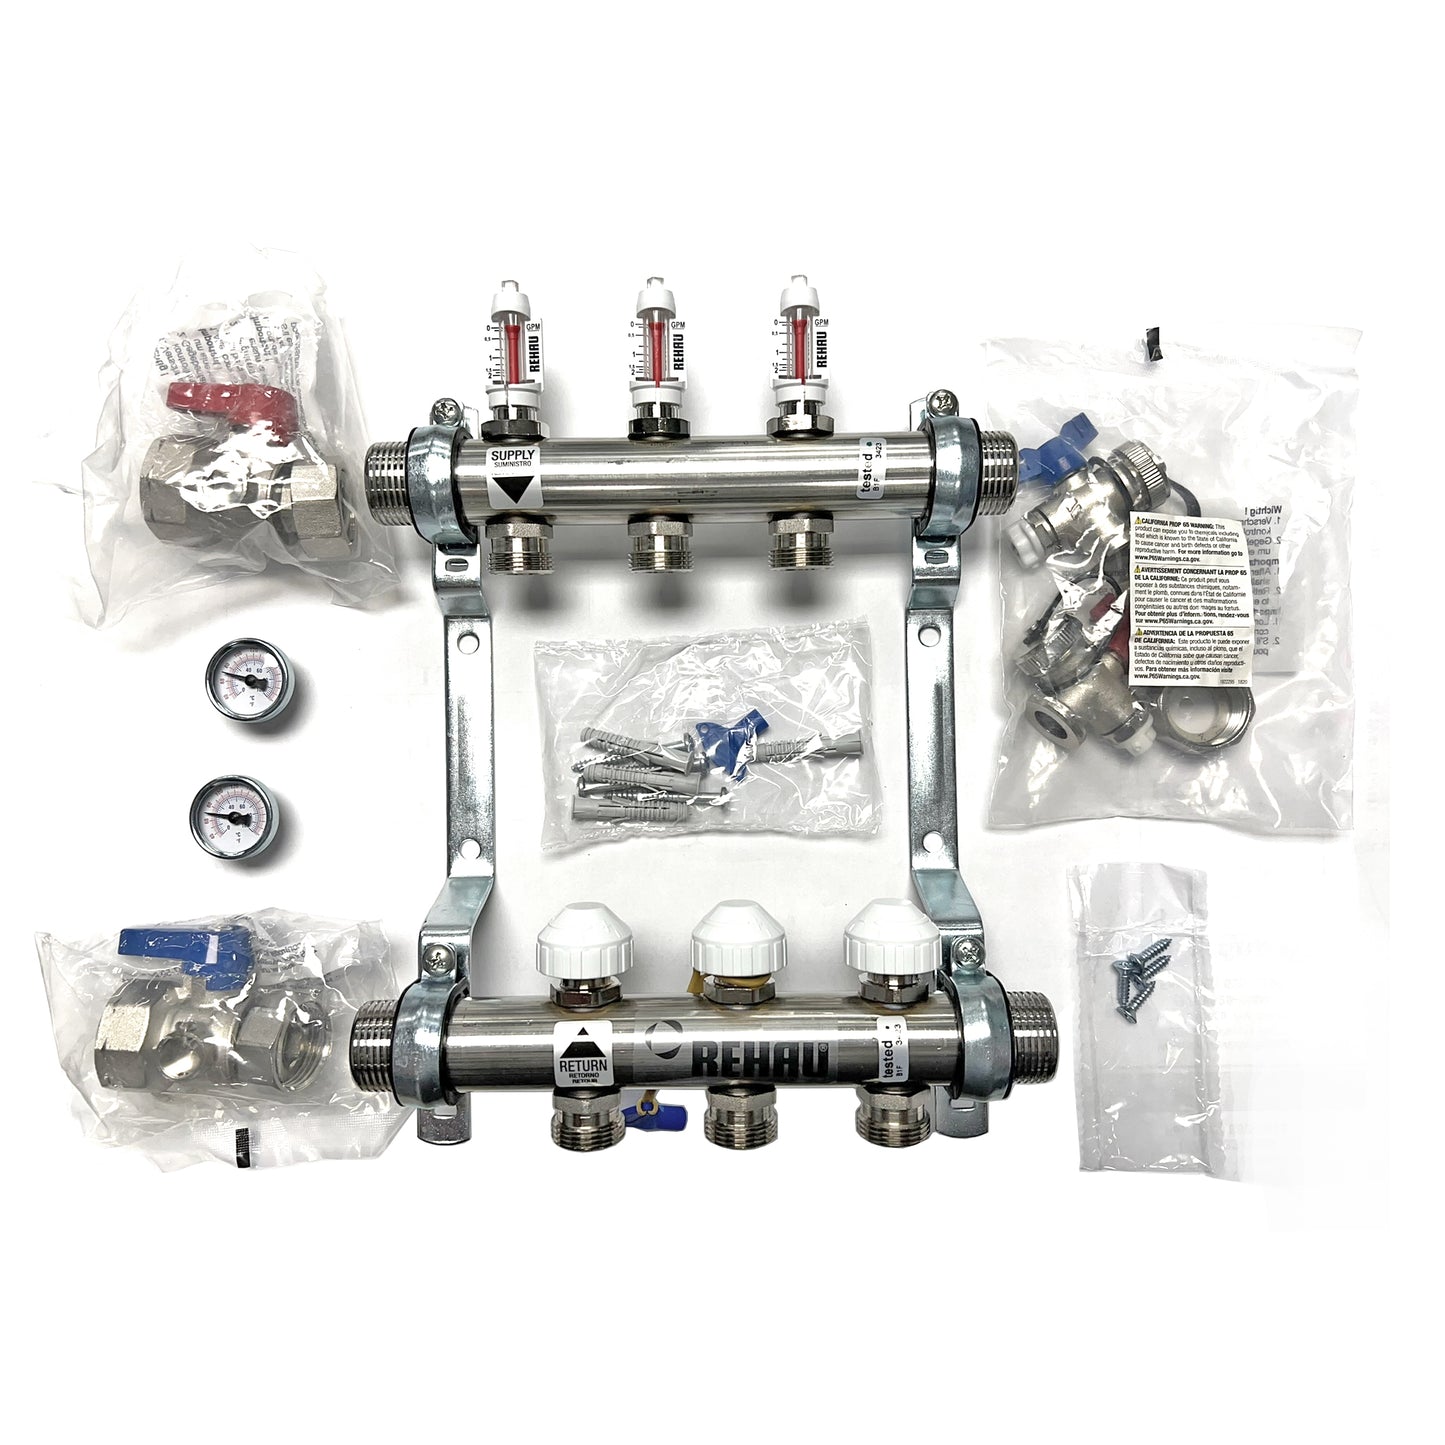 381104-001 - PRO-BALANCE 1" Stainless Steel Manifold With Gauges - 4 Outlet